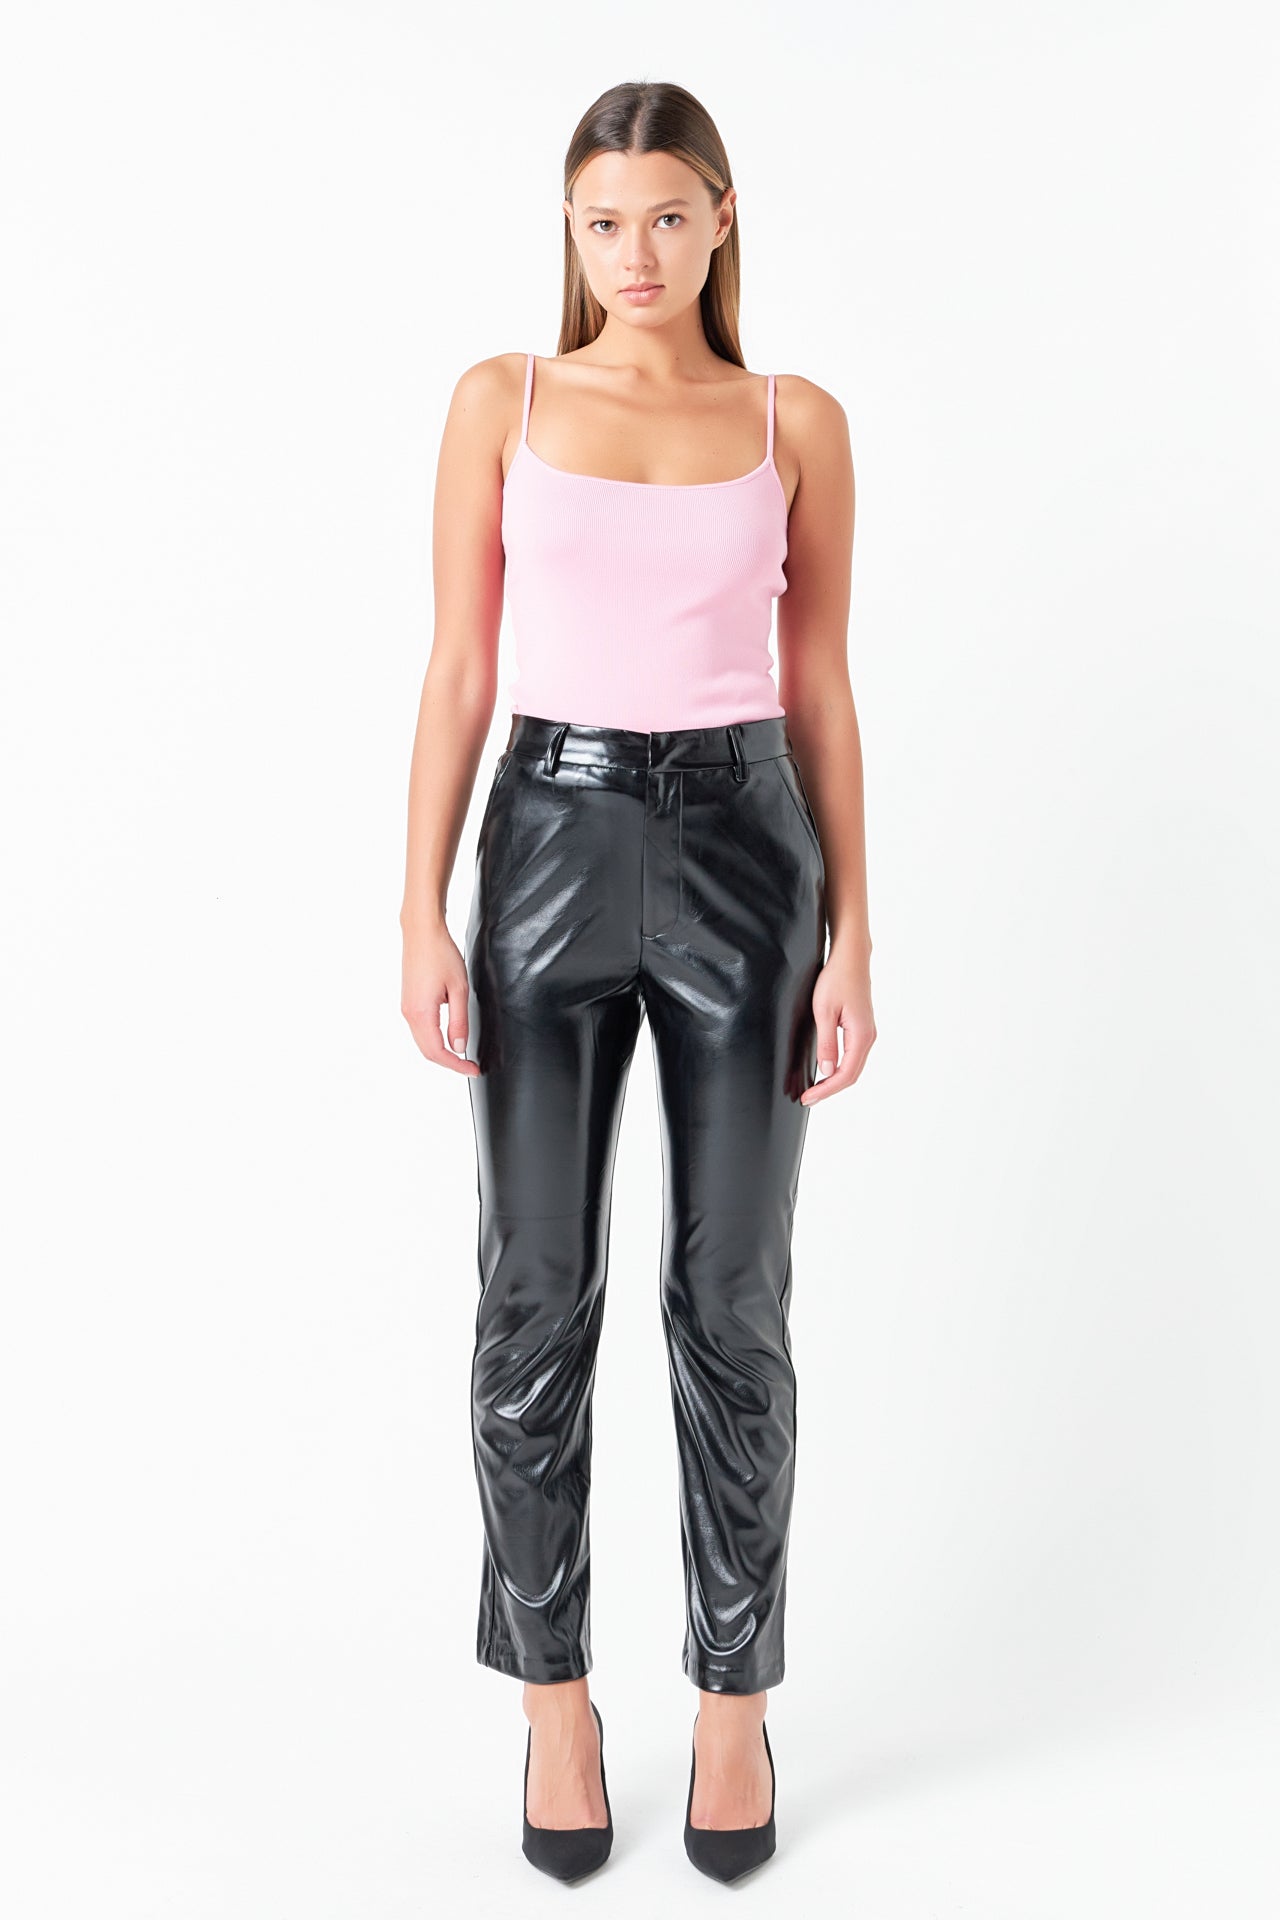 GREY LAB - High-Waisted Faux Leather Pants - PANTS available at Objectrare